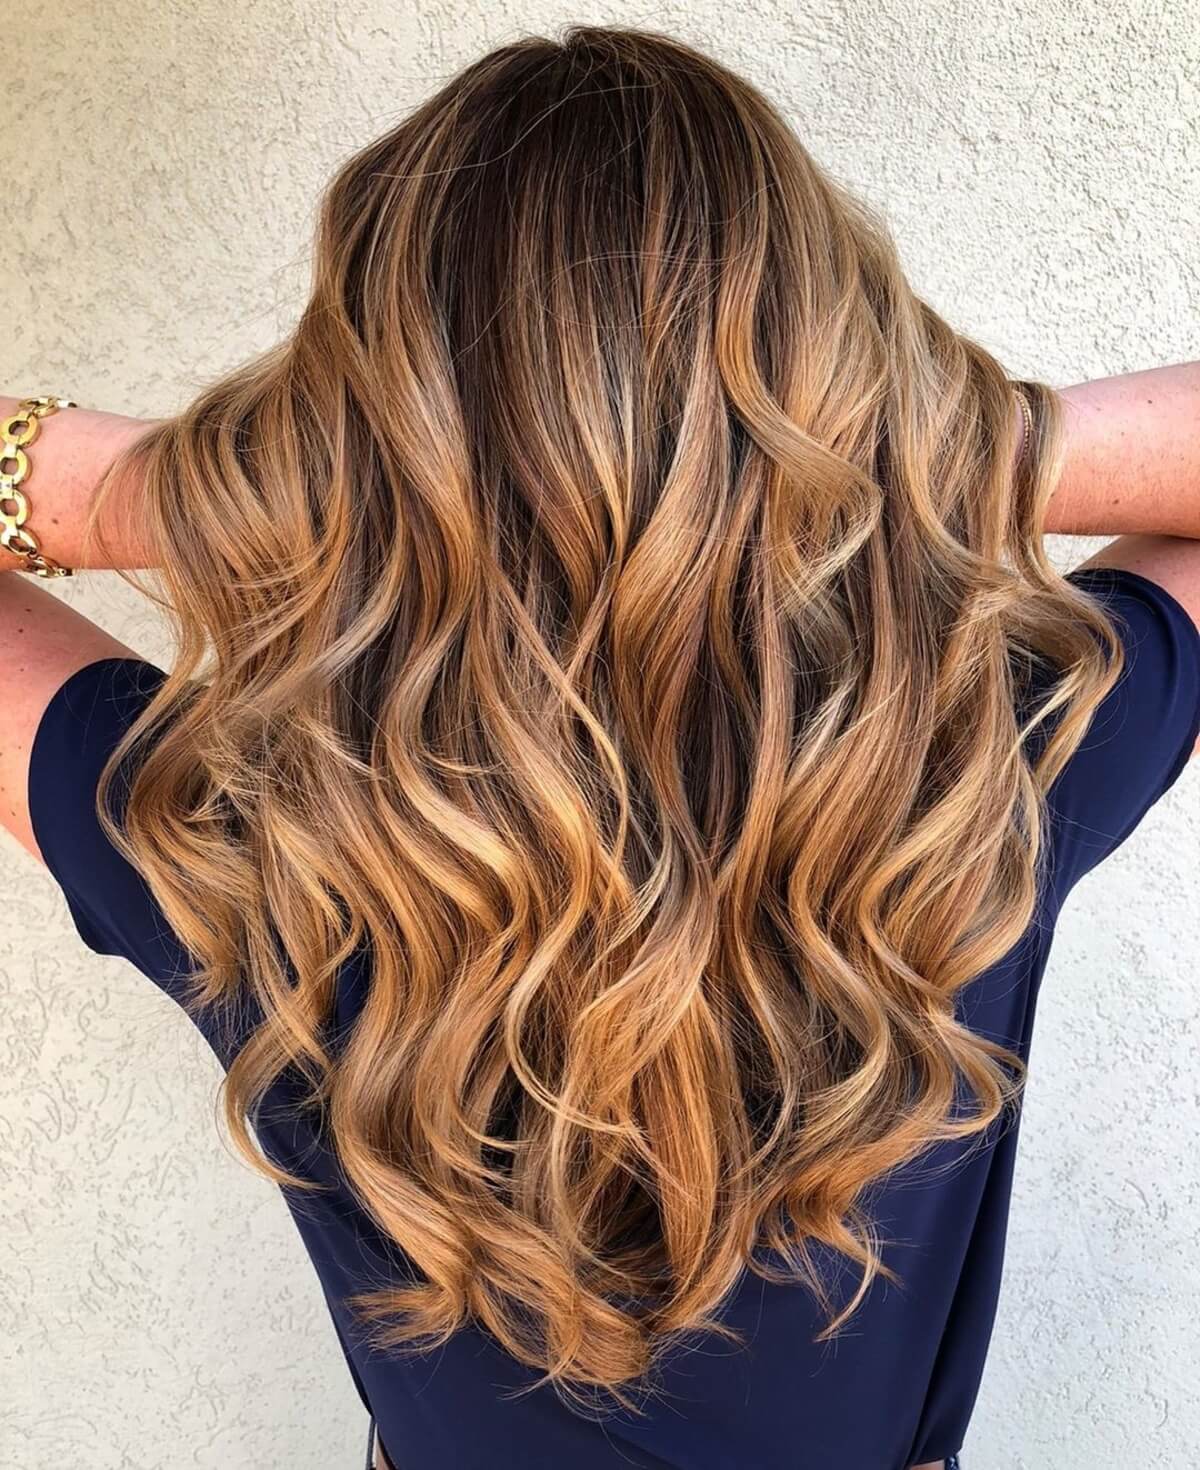 22 Trending Ways To Combine Dark Brown Hair with Caramel Highlights